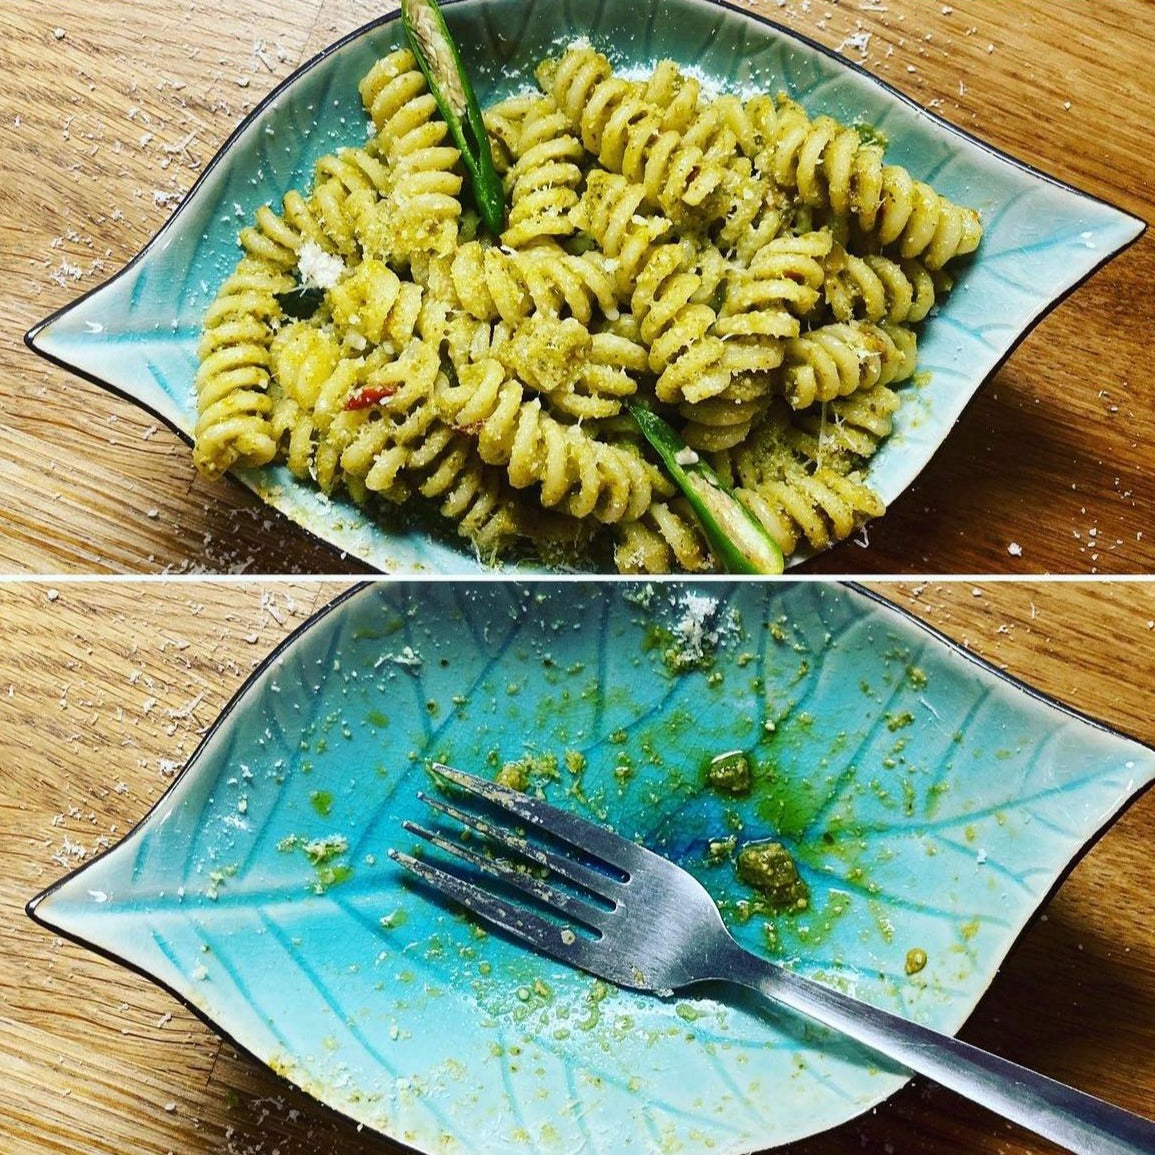 Before and after eating picture - Tasty Jalapeño infused pasta